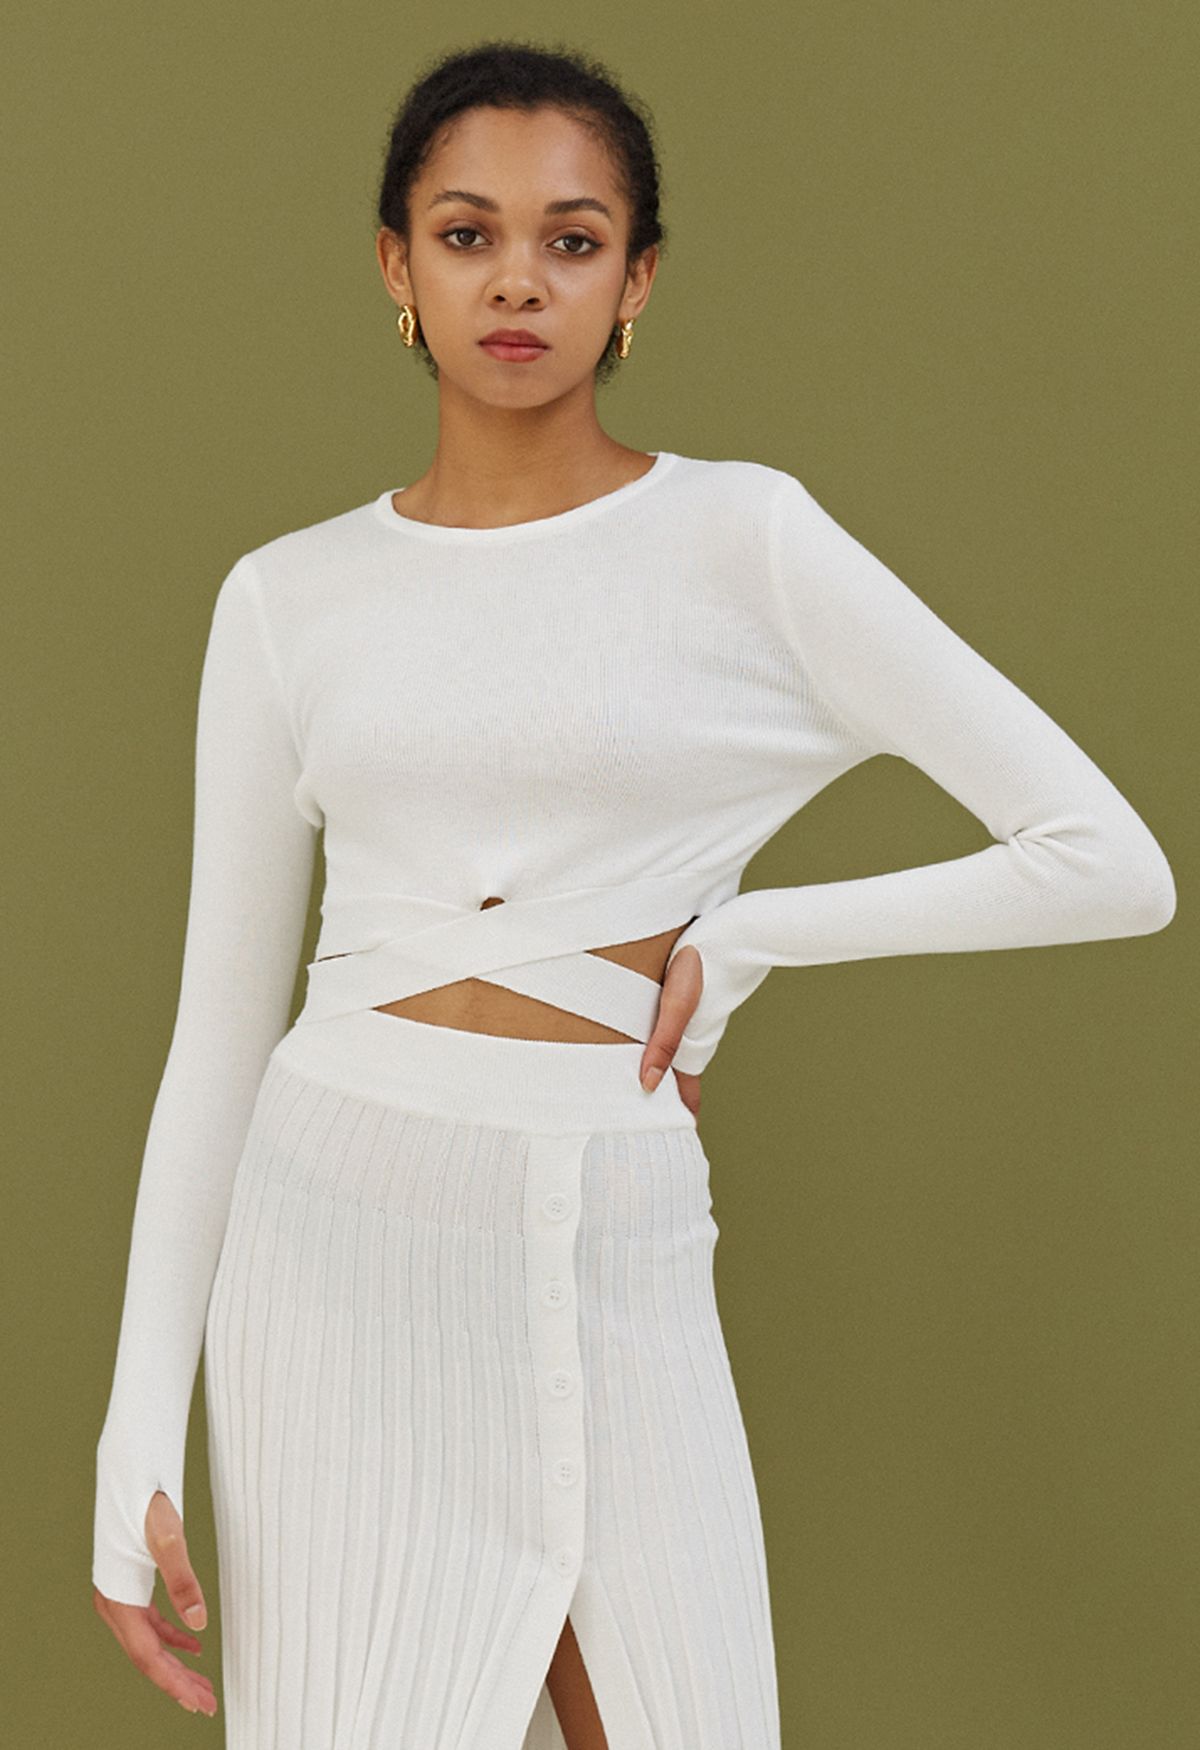 Self-Tie Bowknot Knit Crop Top in White